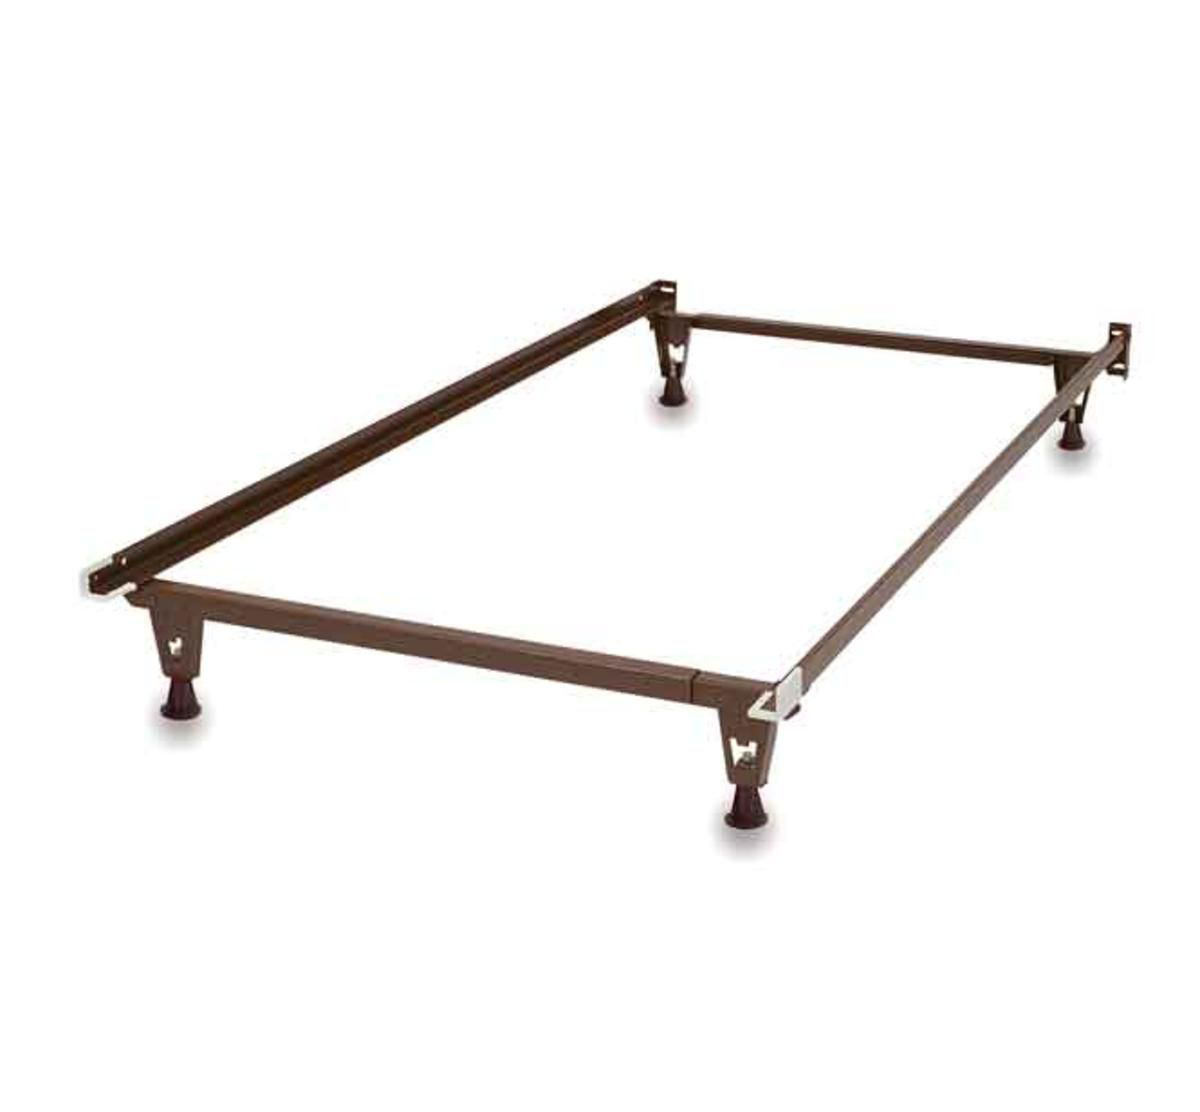 Value Twin Full Bed Frame Bad, How Wide Is A Standard Twin Bed Frame